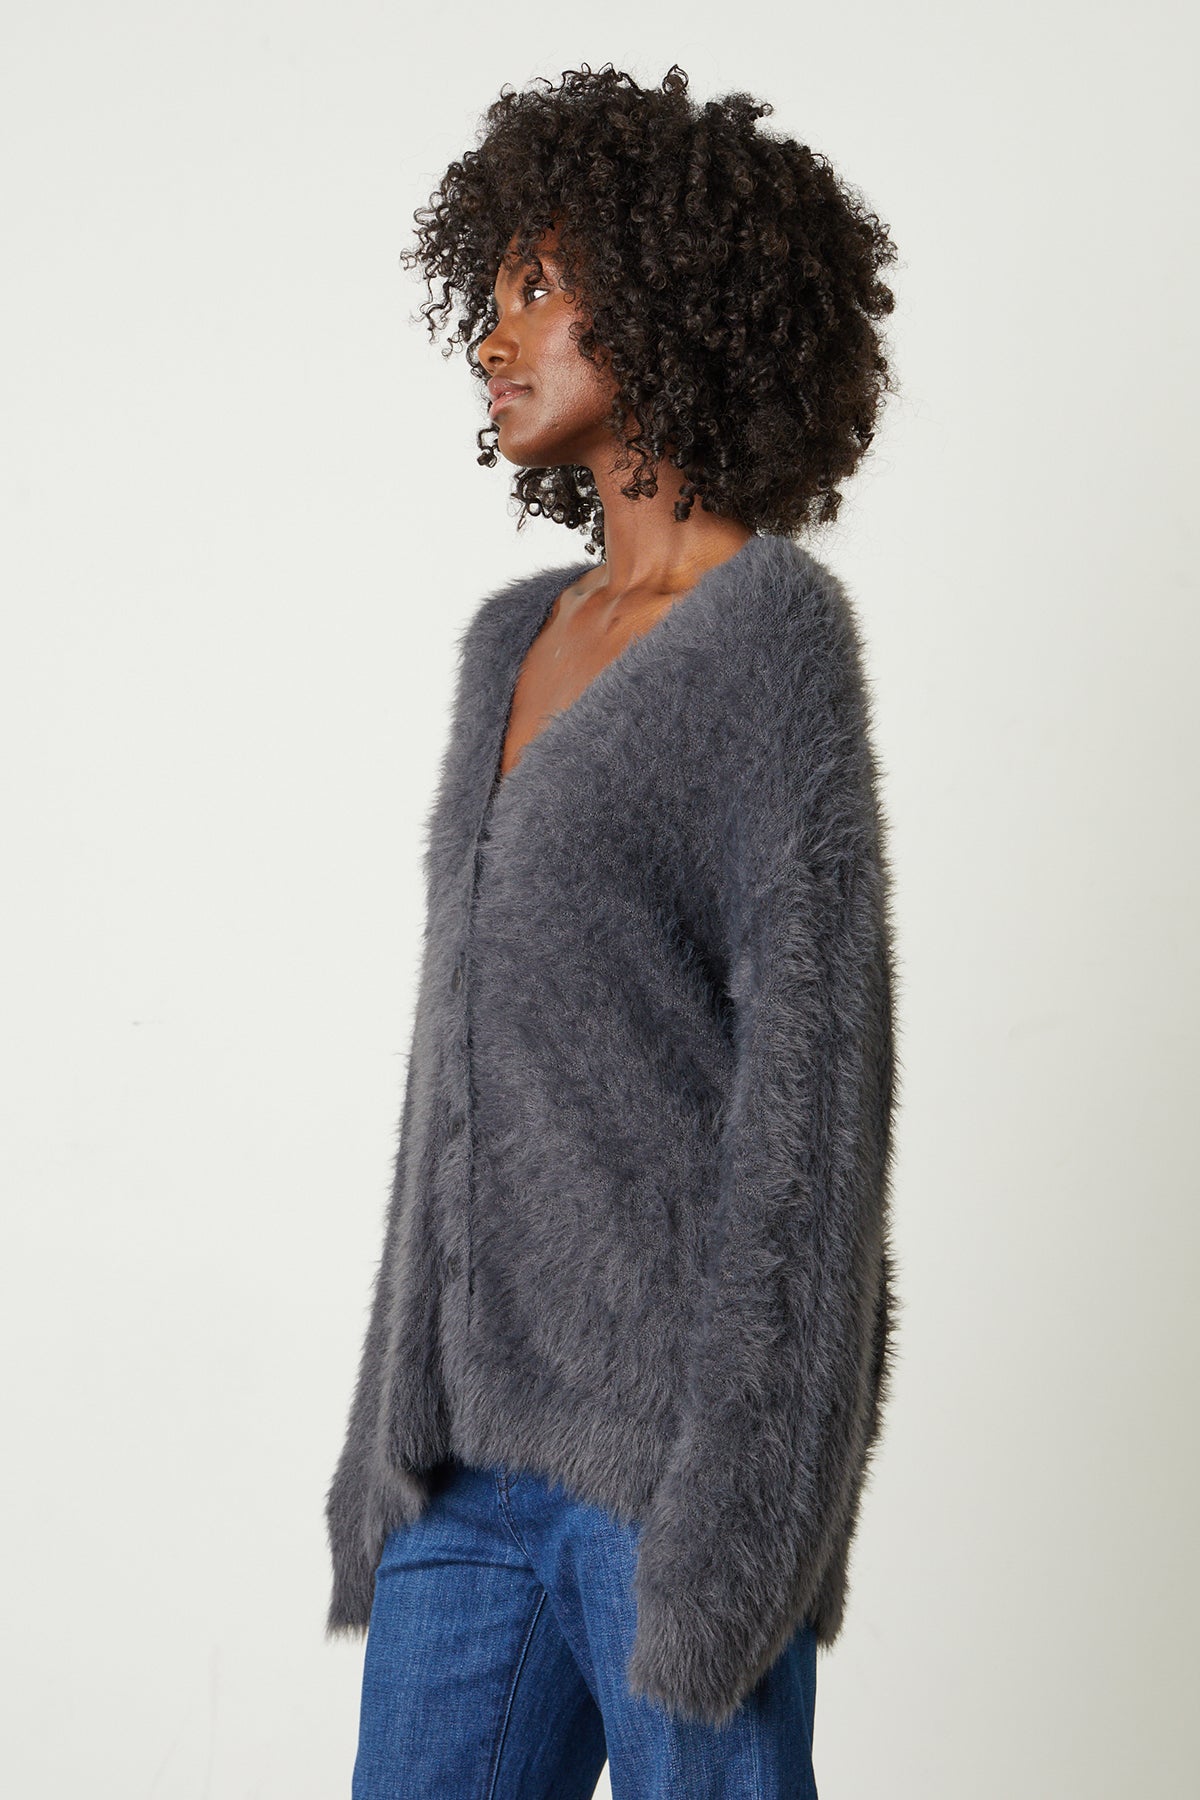 The model is wearing a Velvet by Graham & Spencer BARB FEATHER YARN BUTTON FRONT CARDIGAN.-25985017643201